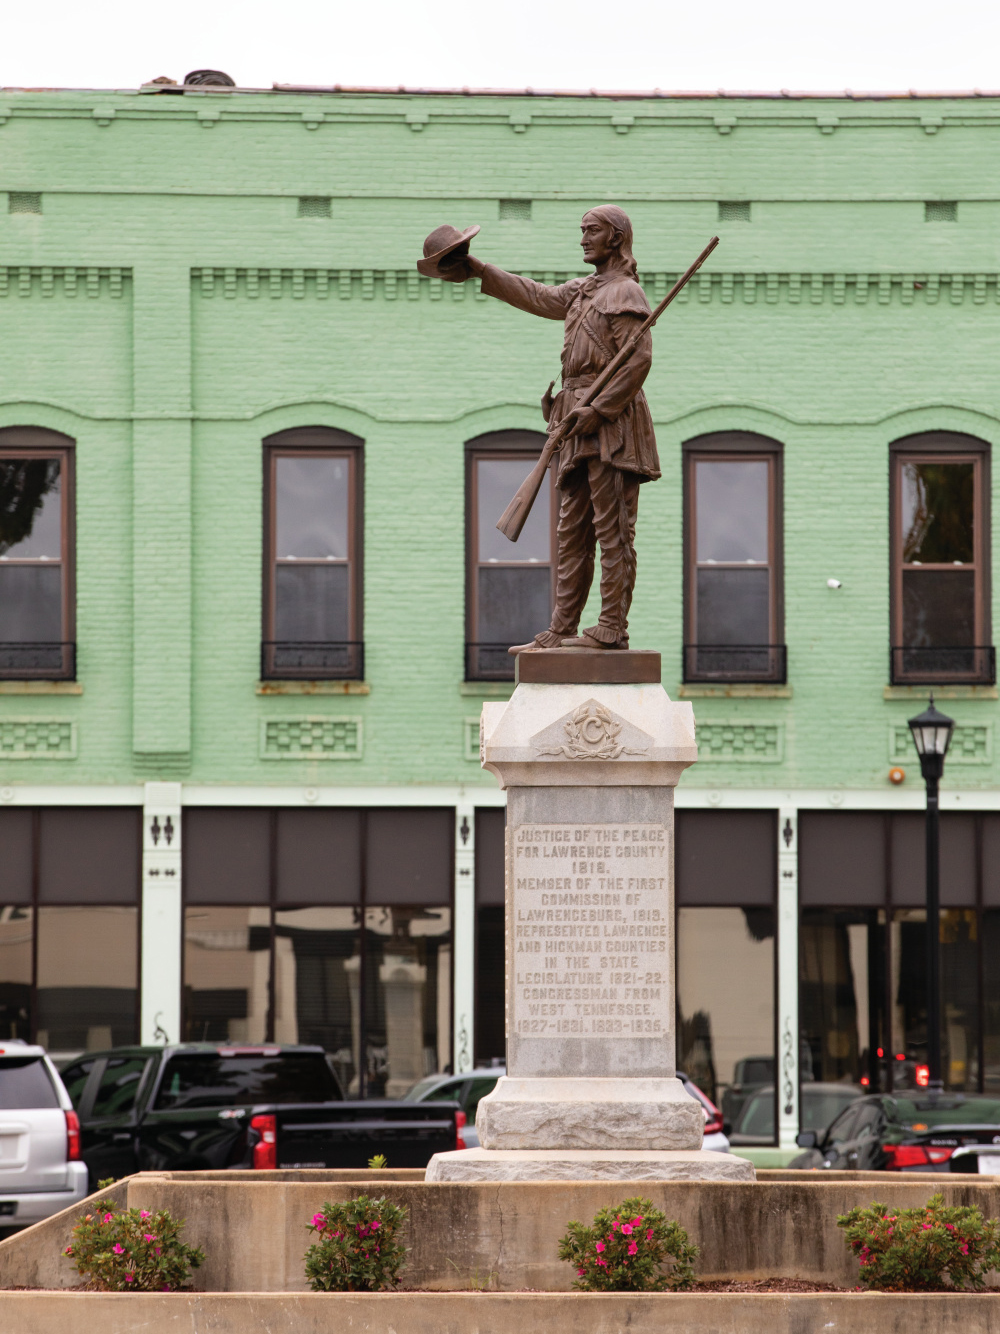 The David Crockett statue stands tall in the middle of the square in downtown Lawrenceburg.